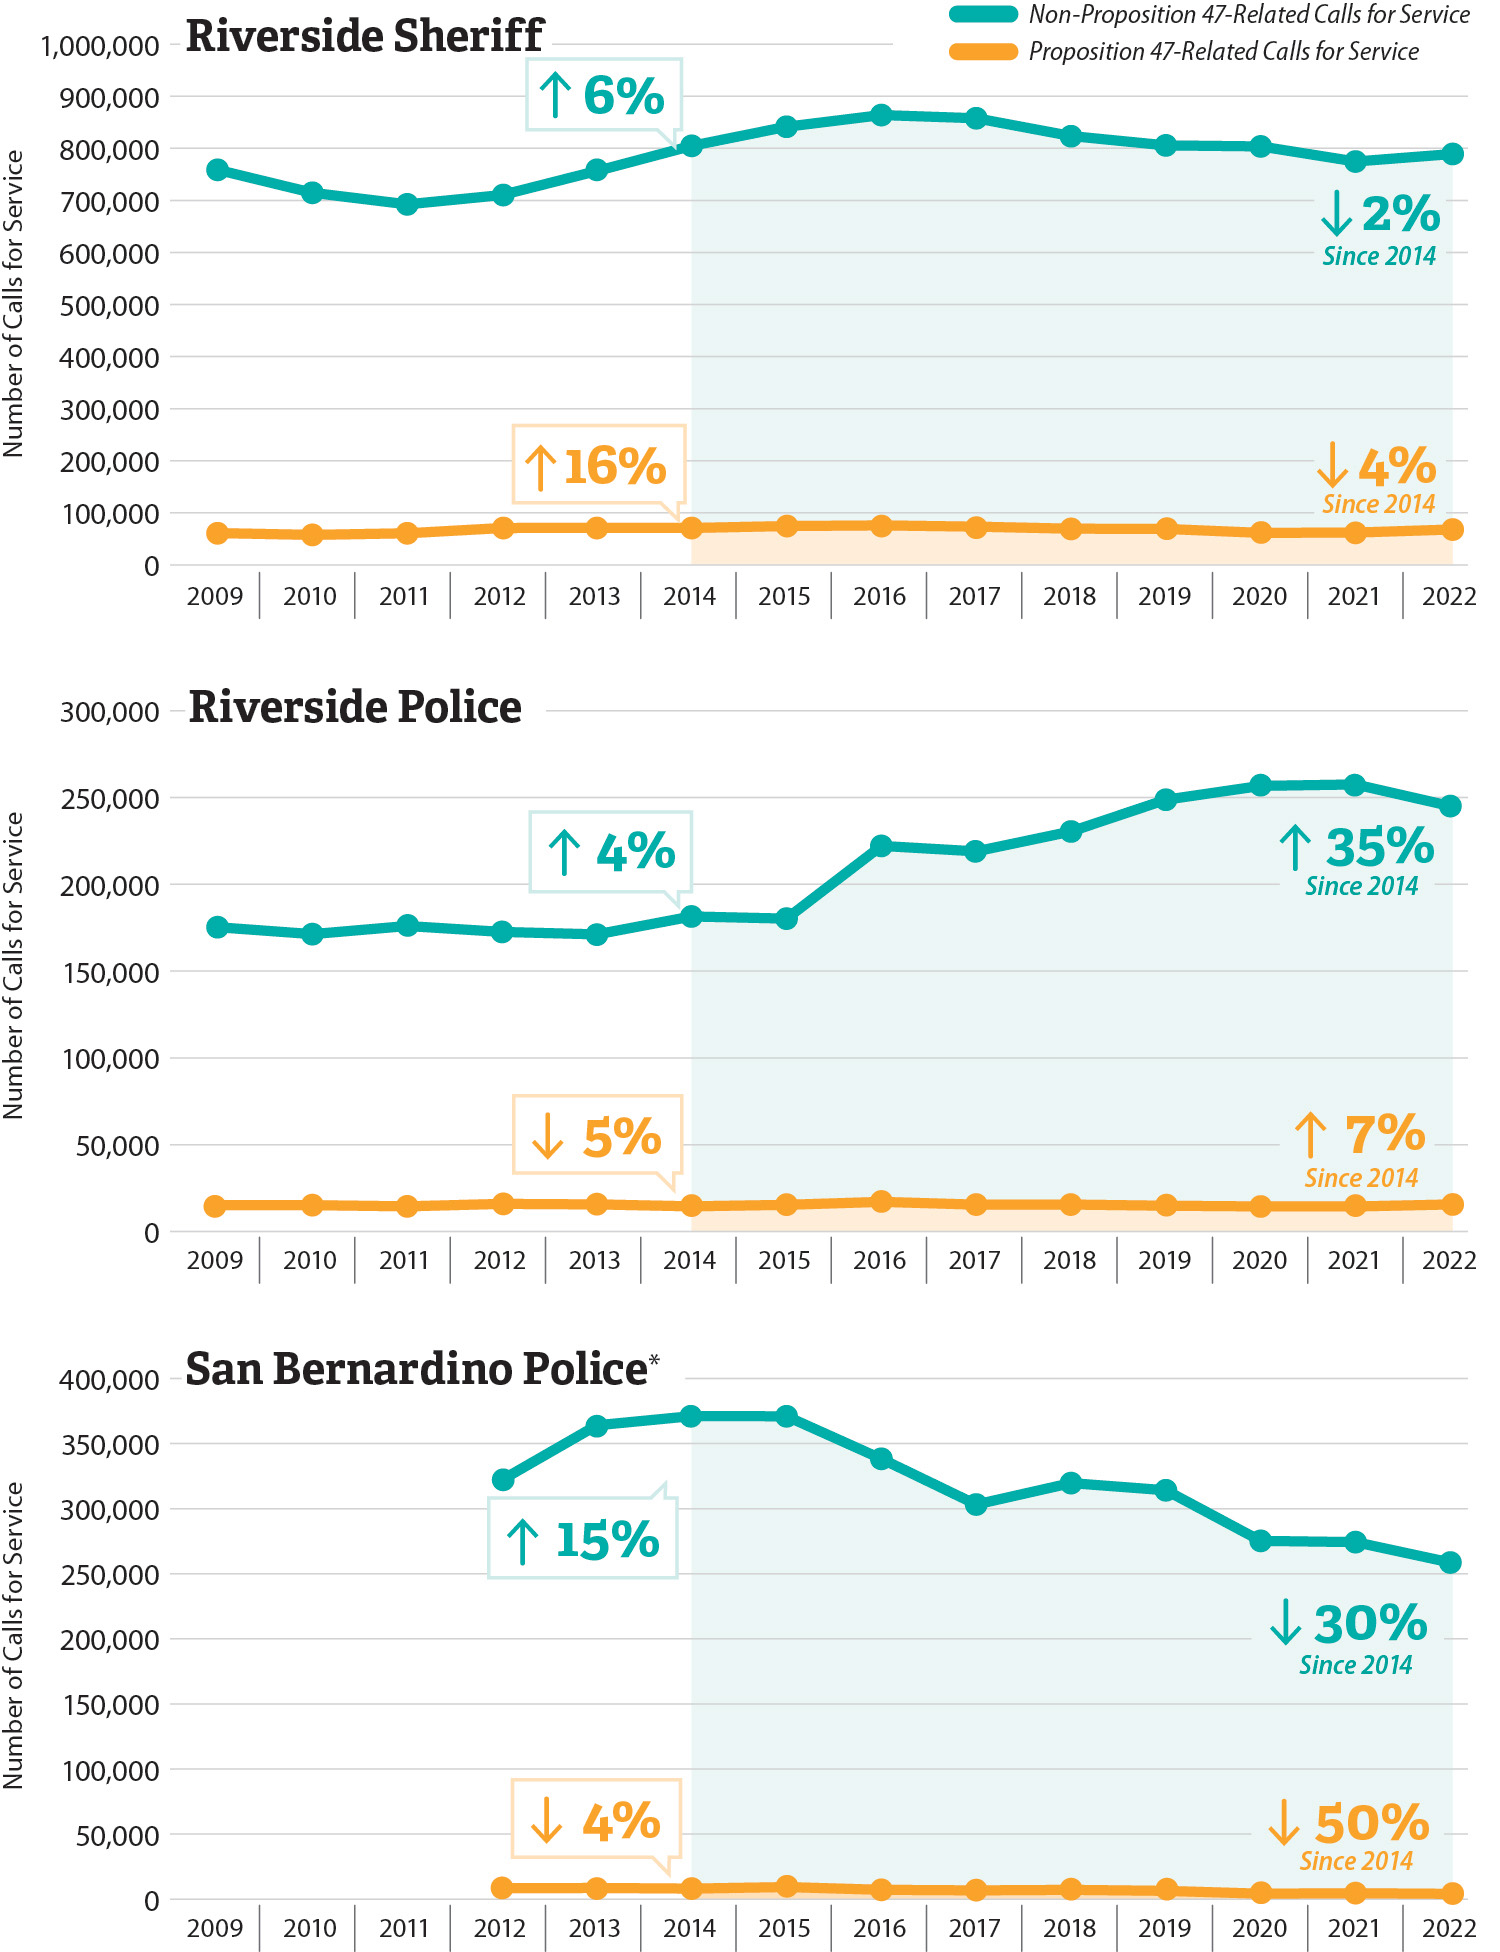 Figure 4 is comprised of three line graphs, one for each of the three law enforcement agencies that the auditors reviewed and they show that calls for service trends varied across the three agencies.